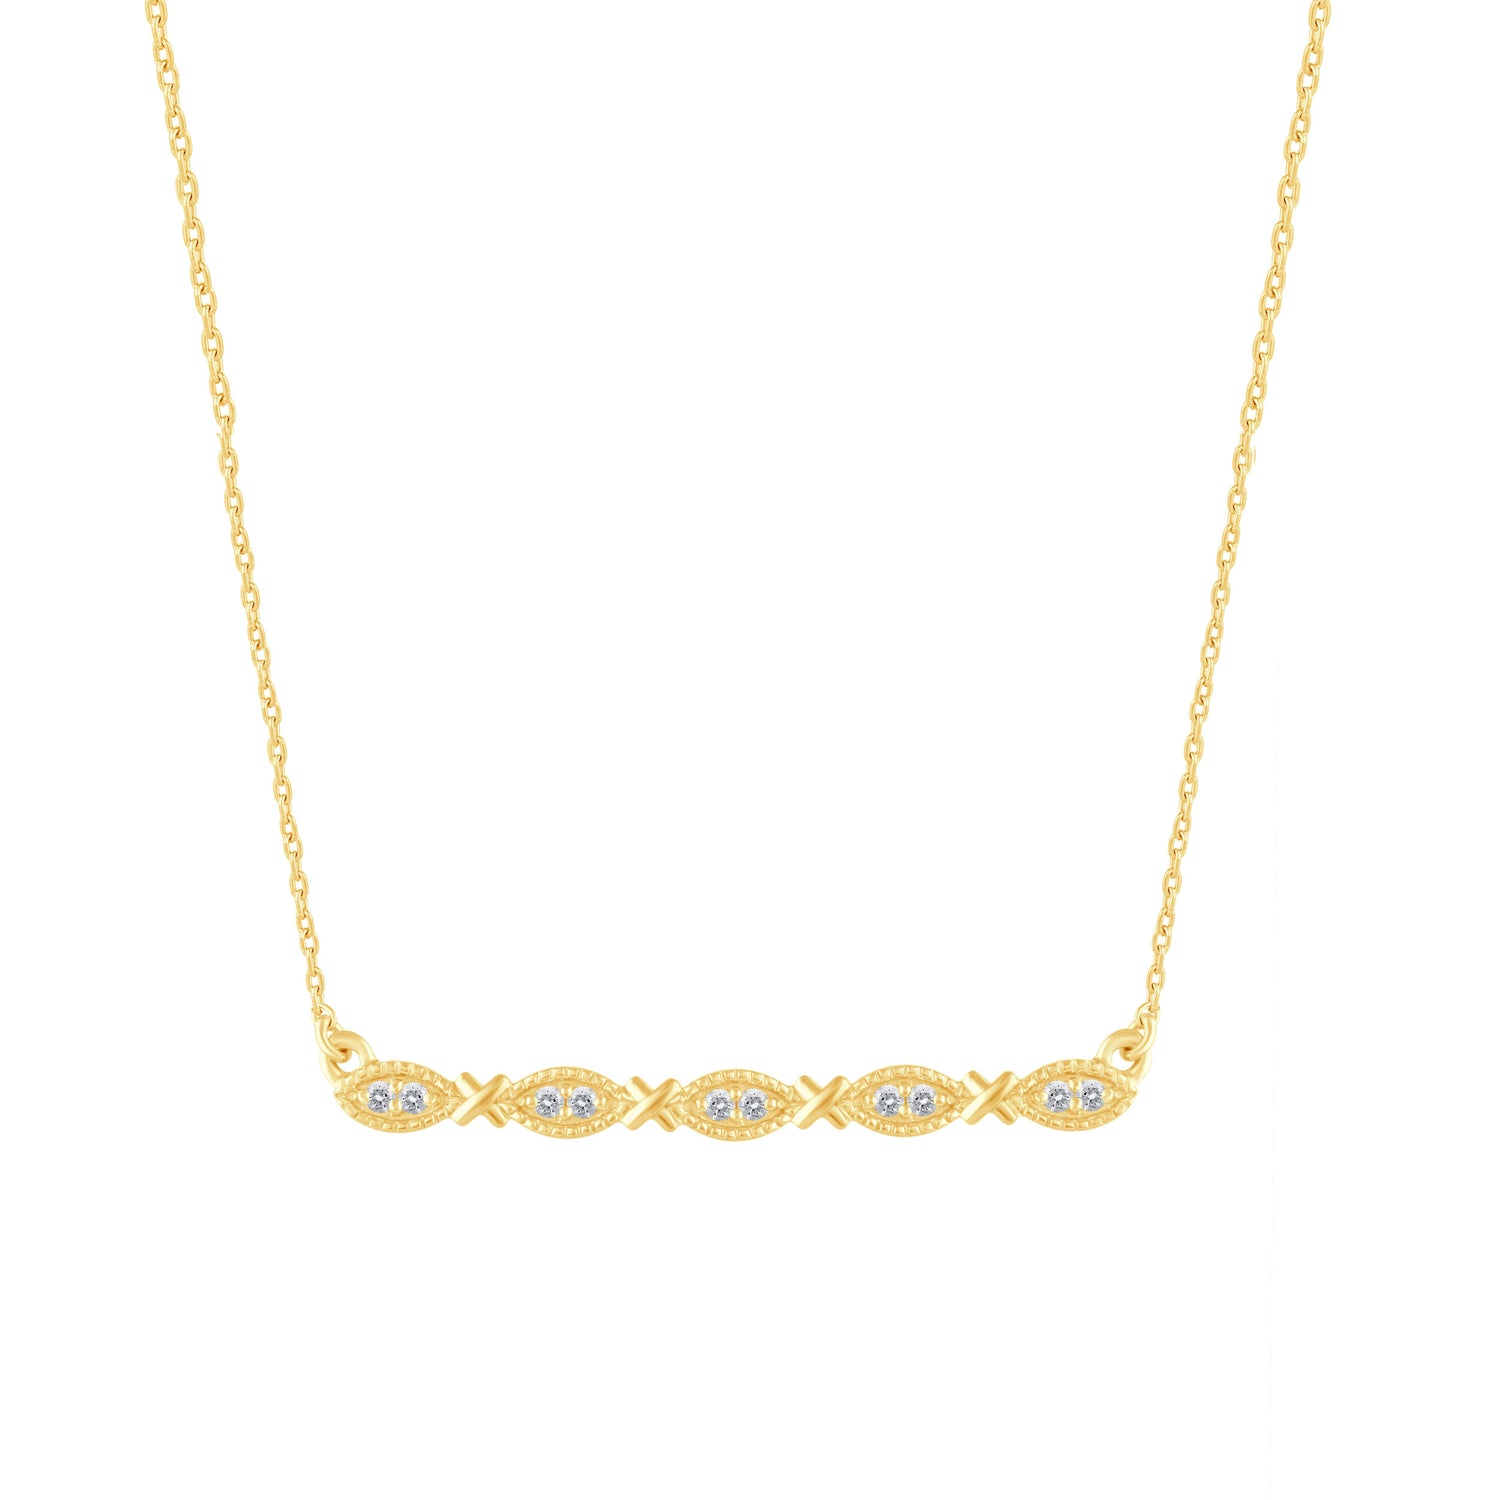 1/10 Cttw Diamond Mosaic XO Bar Pendant Necklace set in 925 Sterling Silver 14K Yellow Gold Plating